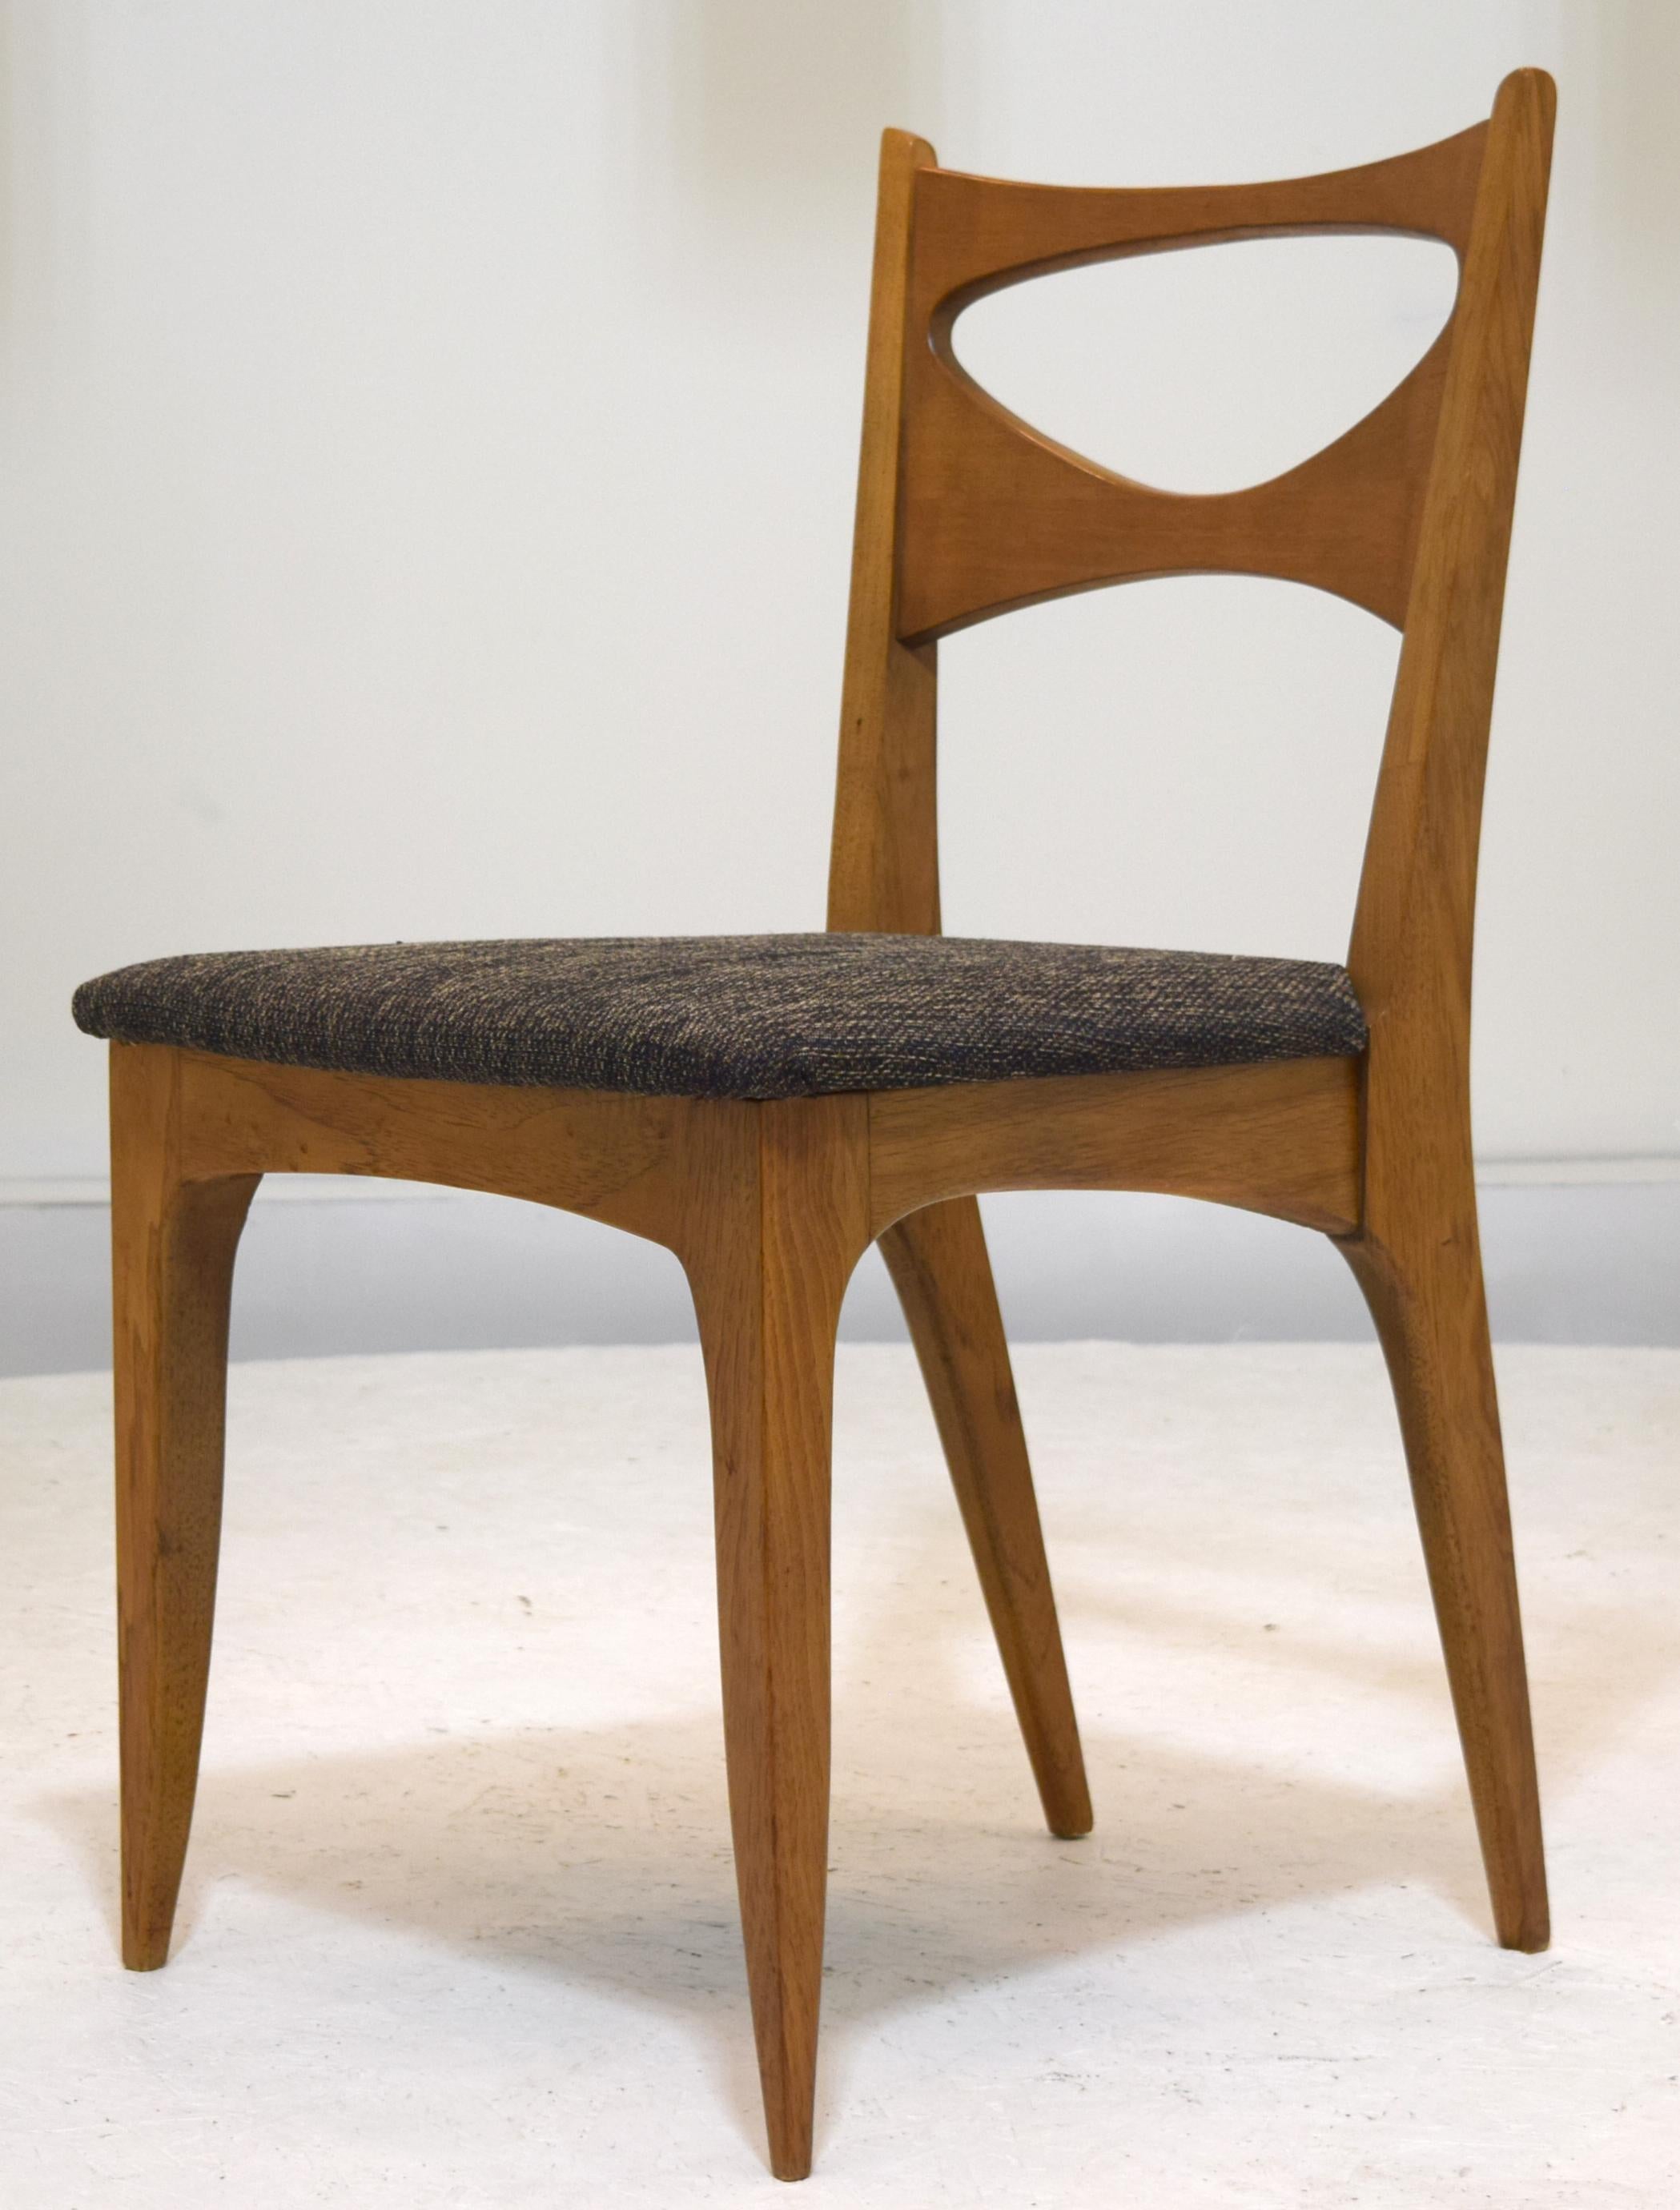 Of solid walnut construction with sculpted backs is a set of six dining chairs for the Drexel Profile series, designed by John Van Koert, Model K62. Note the original walnut has a lighter tone which highlights the grain wonderfully. This patina is